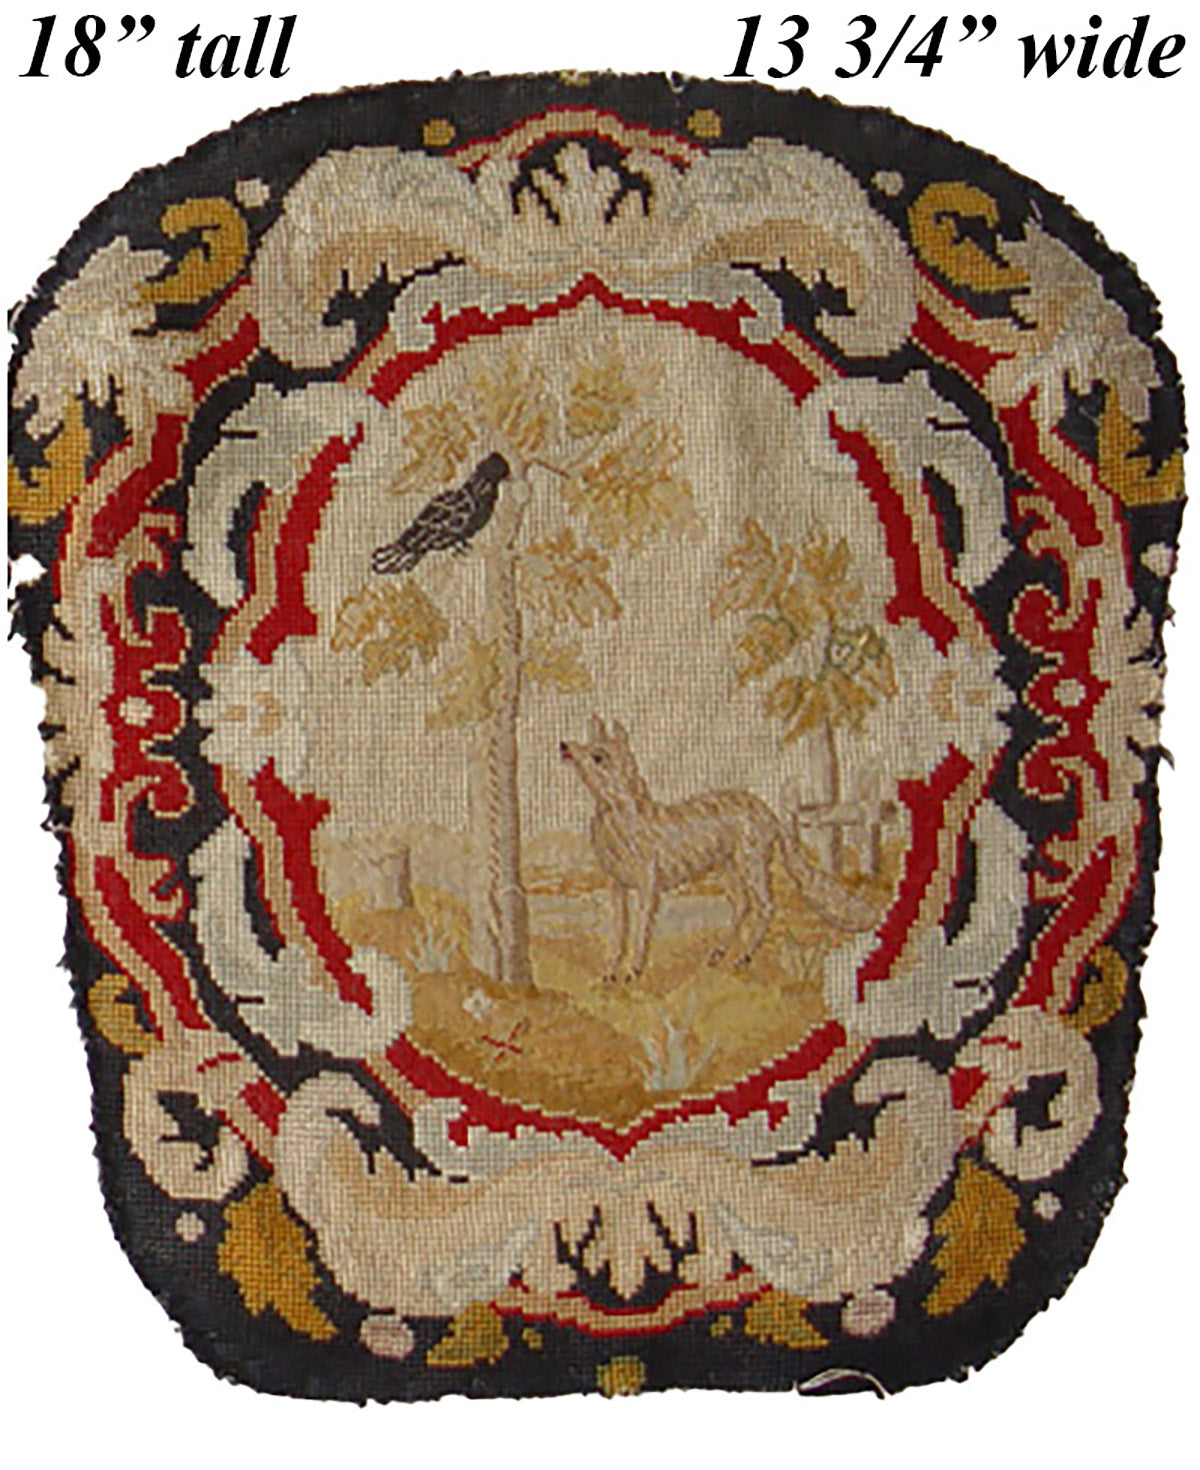 Superb Large Pair Antique 18th Century French Needlepoint Tapestry Panels for Pillows or Chair (2)